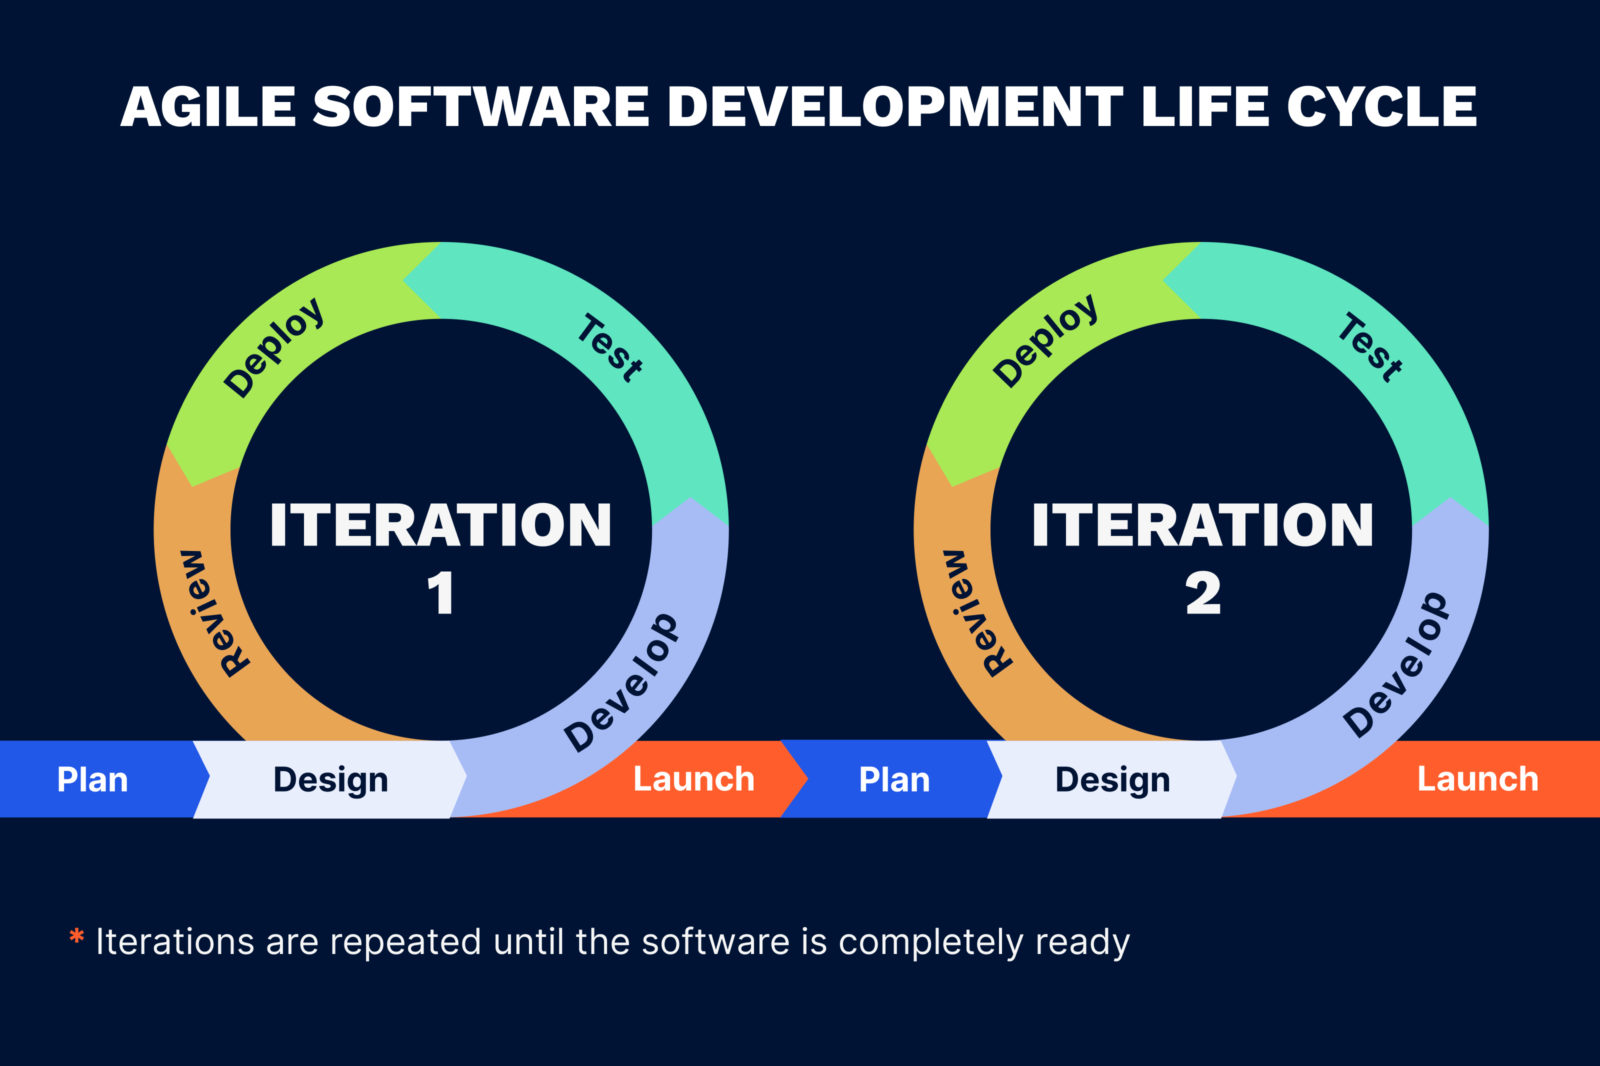 The stages of the agile software development life cycle